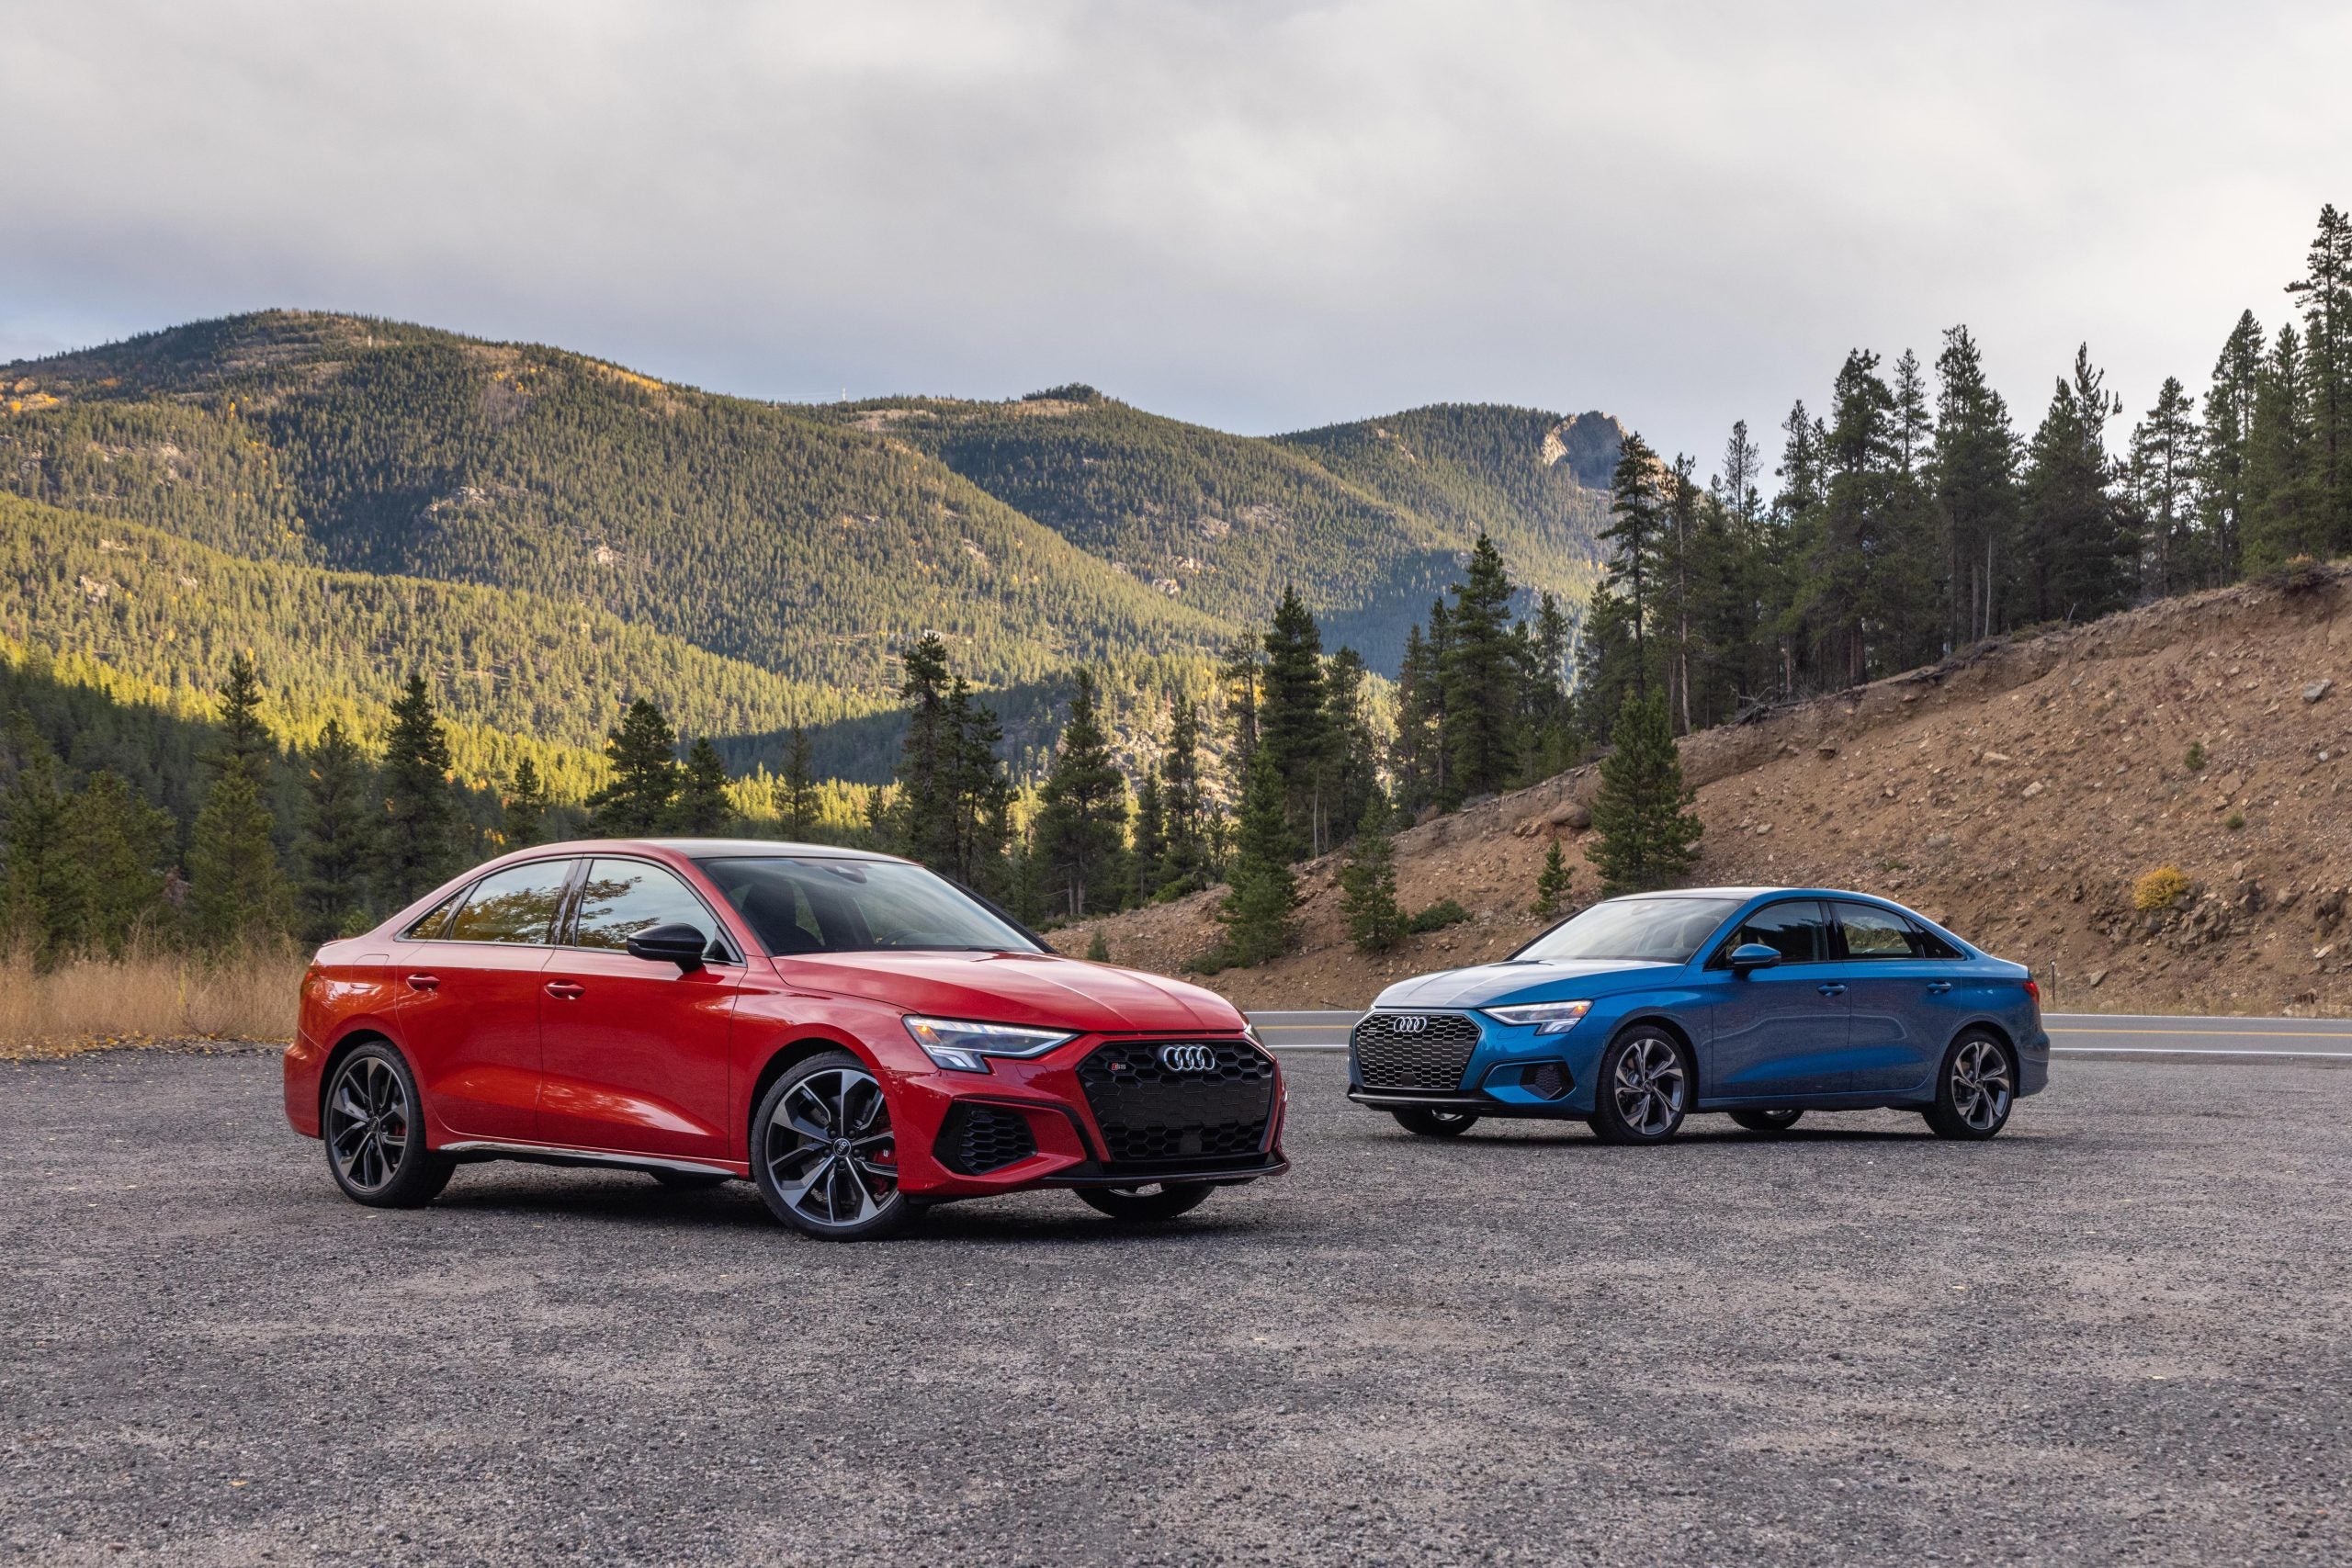 We Hit The Mountain Roads Of Denver To Test The 2022 Audi A3 And S3 Sedans. Here's What You Should Know About Them.